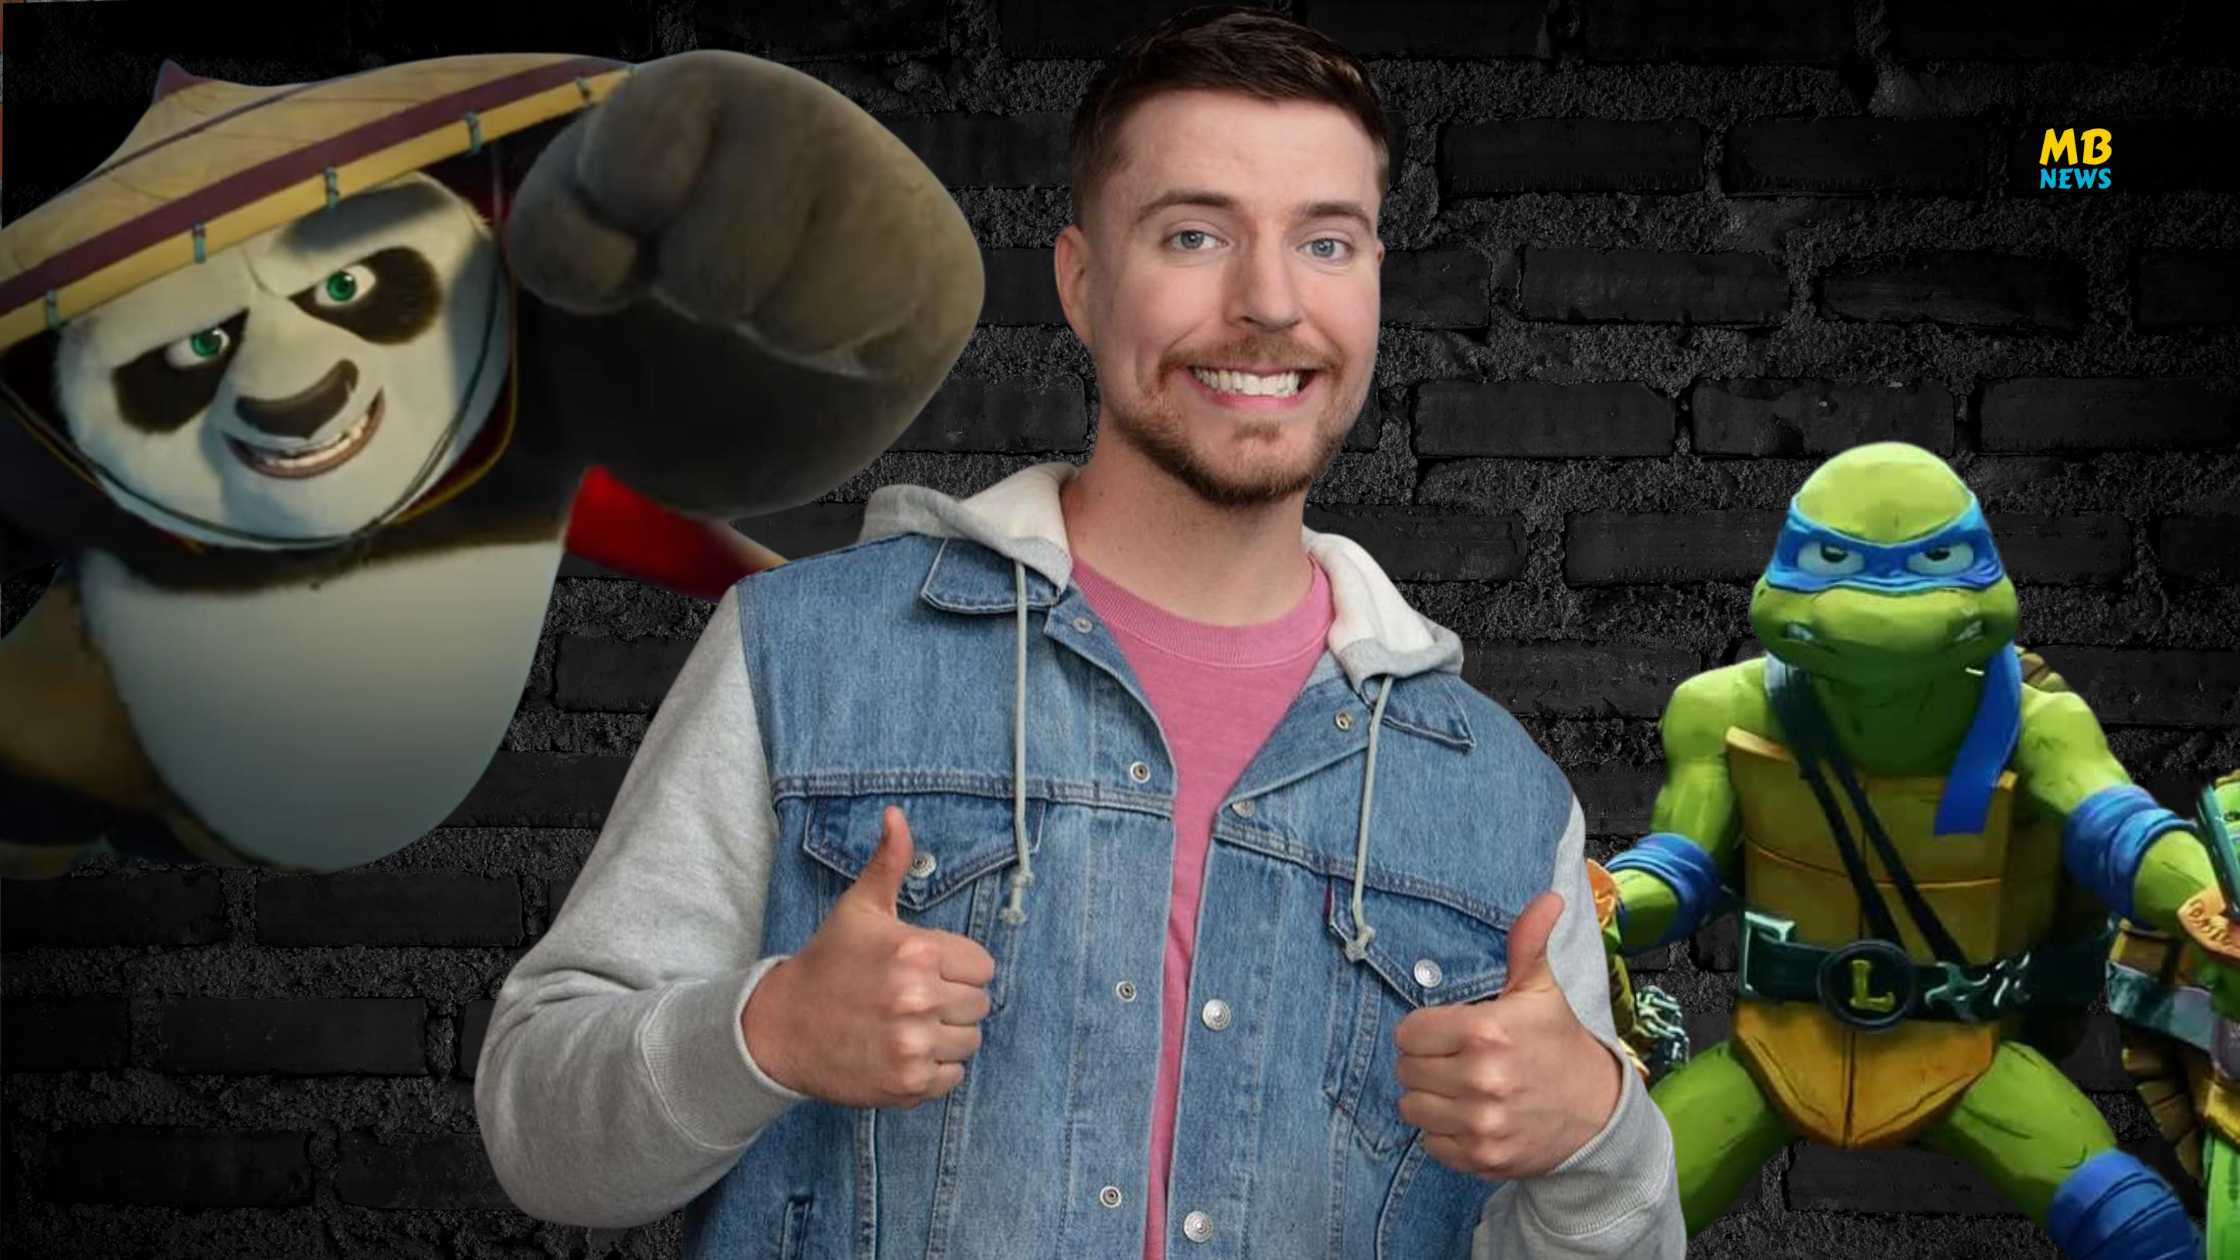 MrBeast Ventures into the Animated World with Roles in Teenage Mutant Ninja Turtles and Kung Fu Panda Sequels